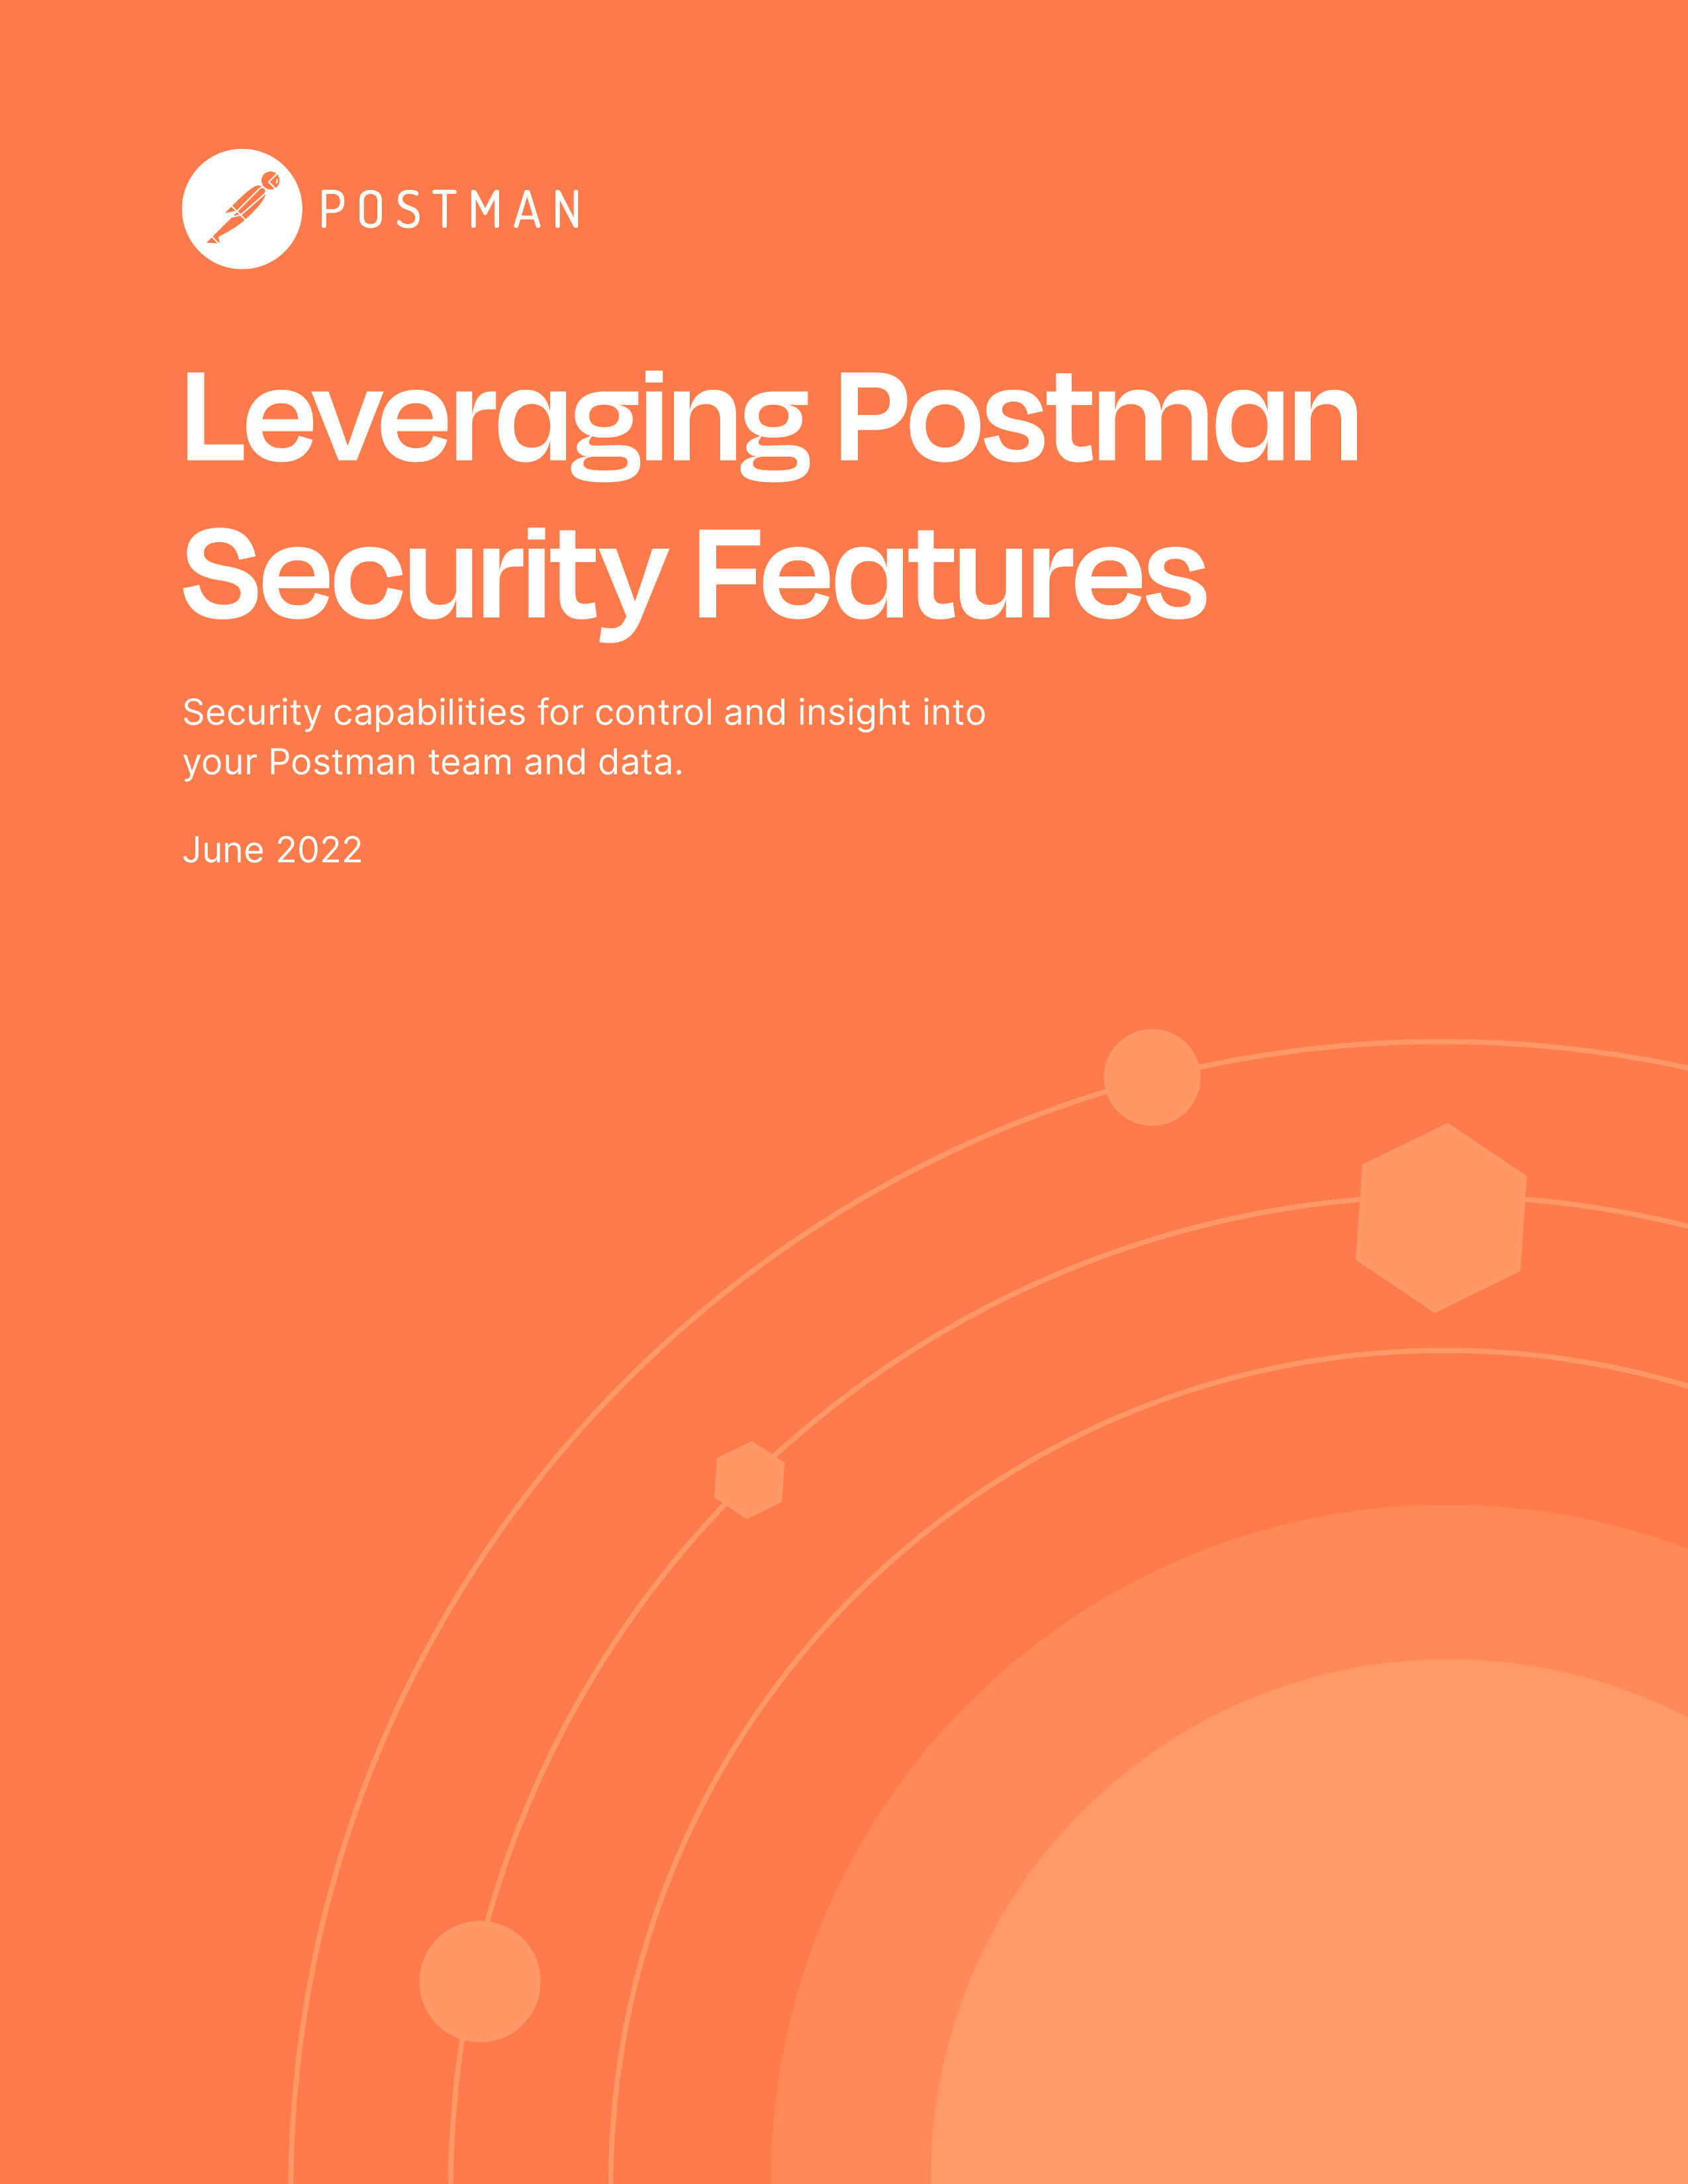 Leveraging Postman Security Features. Book Cover.